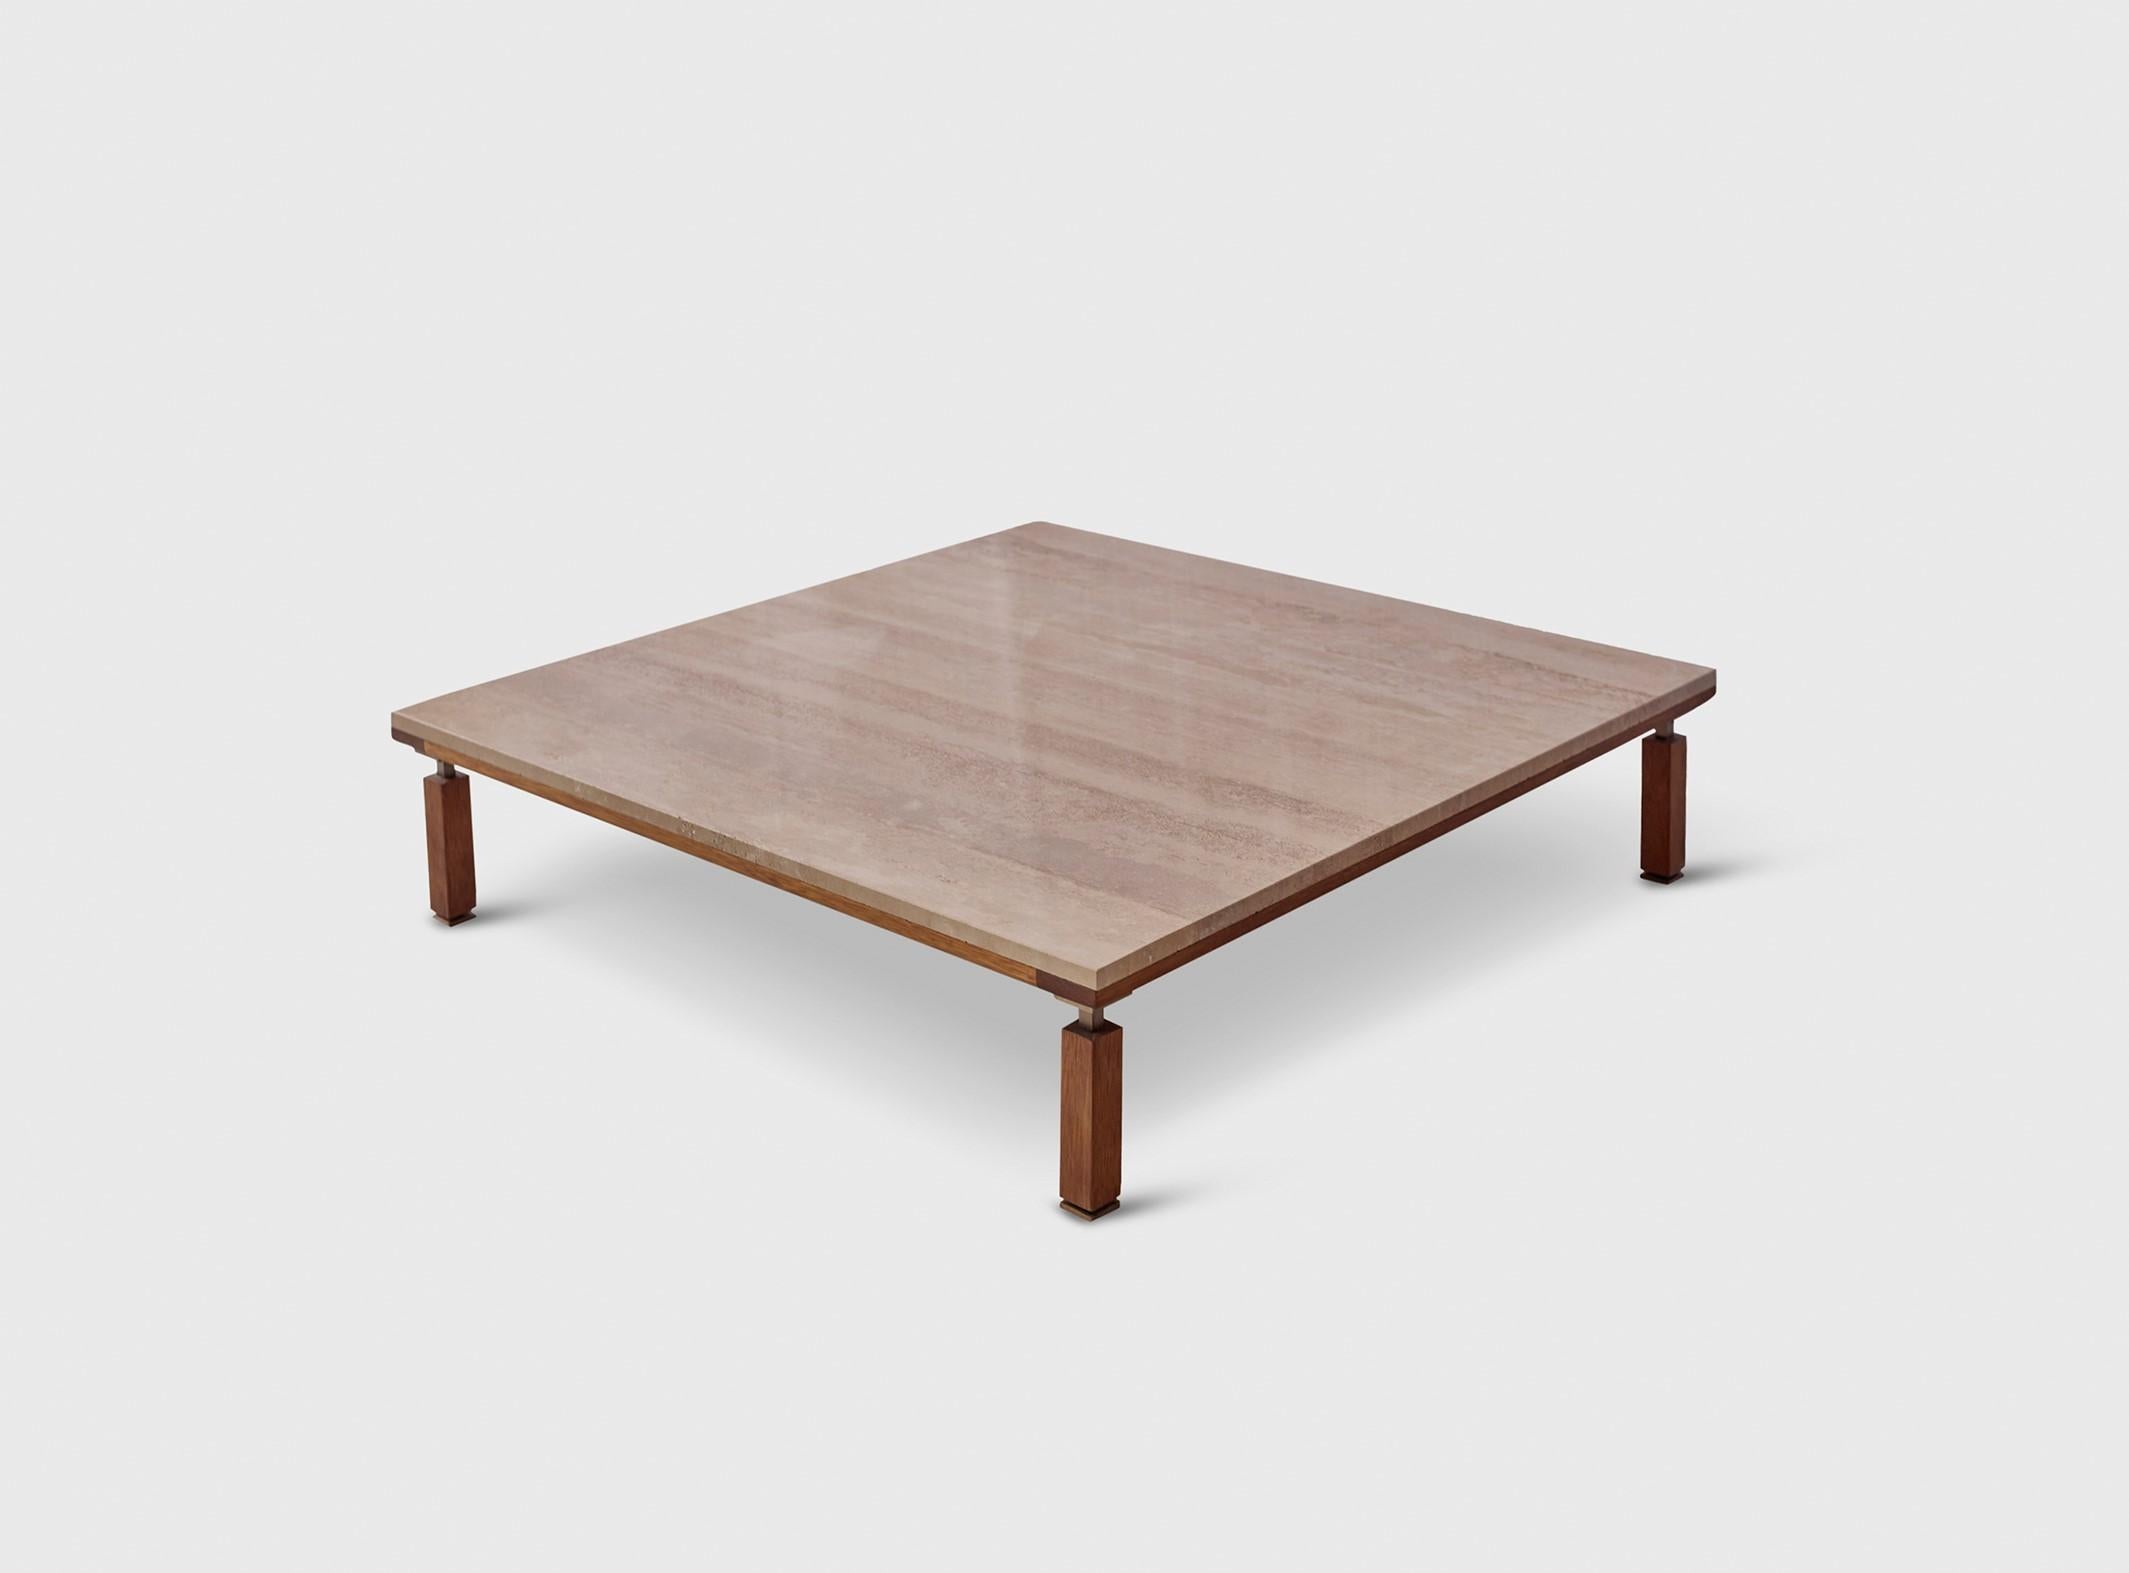 Nerthus coffee table by Atra Design
Dimensions: D 86 x W 86 x H 37 cm
Materials: mahogany wood, marbe, steel

Atra Design
We are Atra, a furniture brand produced by Atra form a mexico city–based high end production facility that also houses our